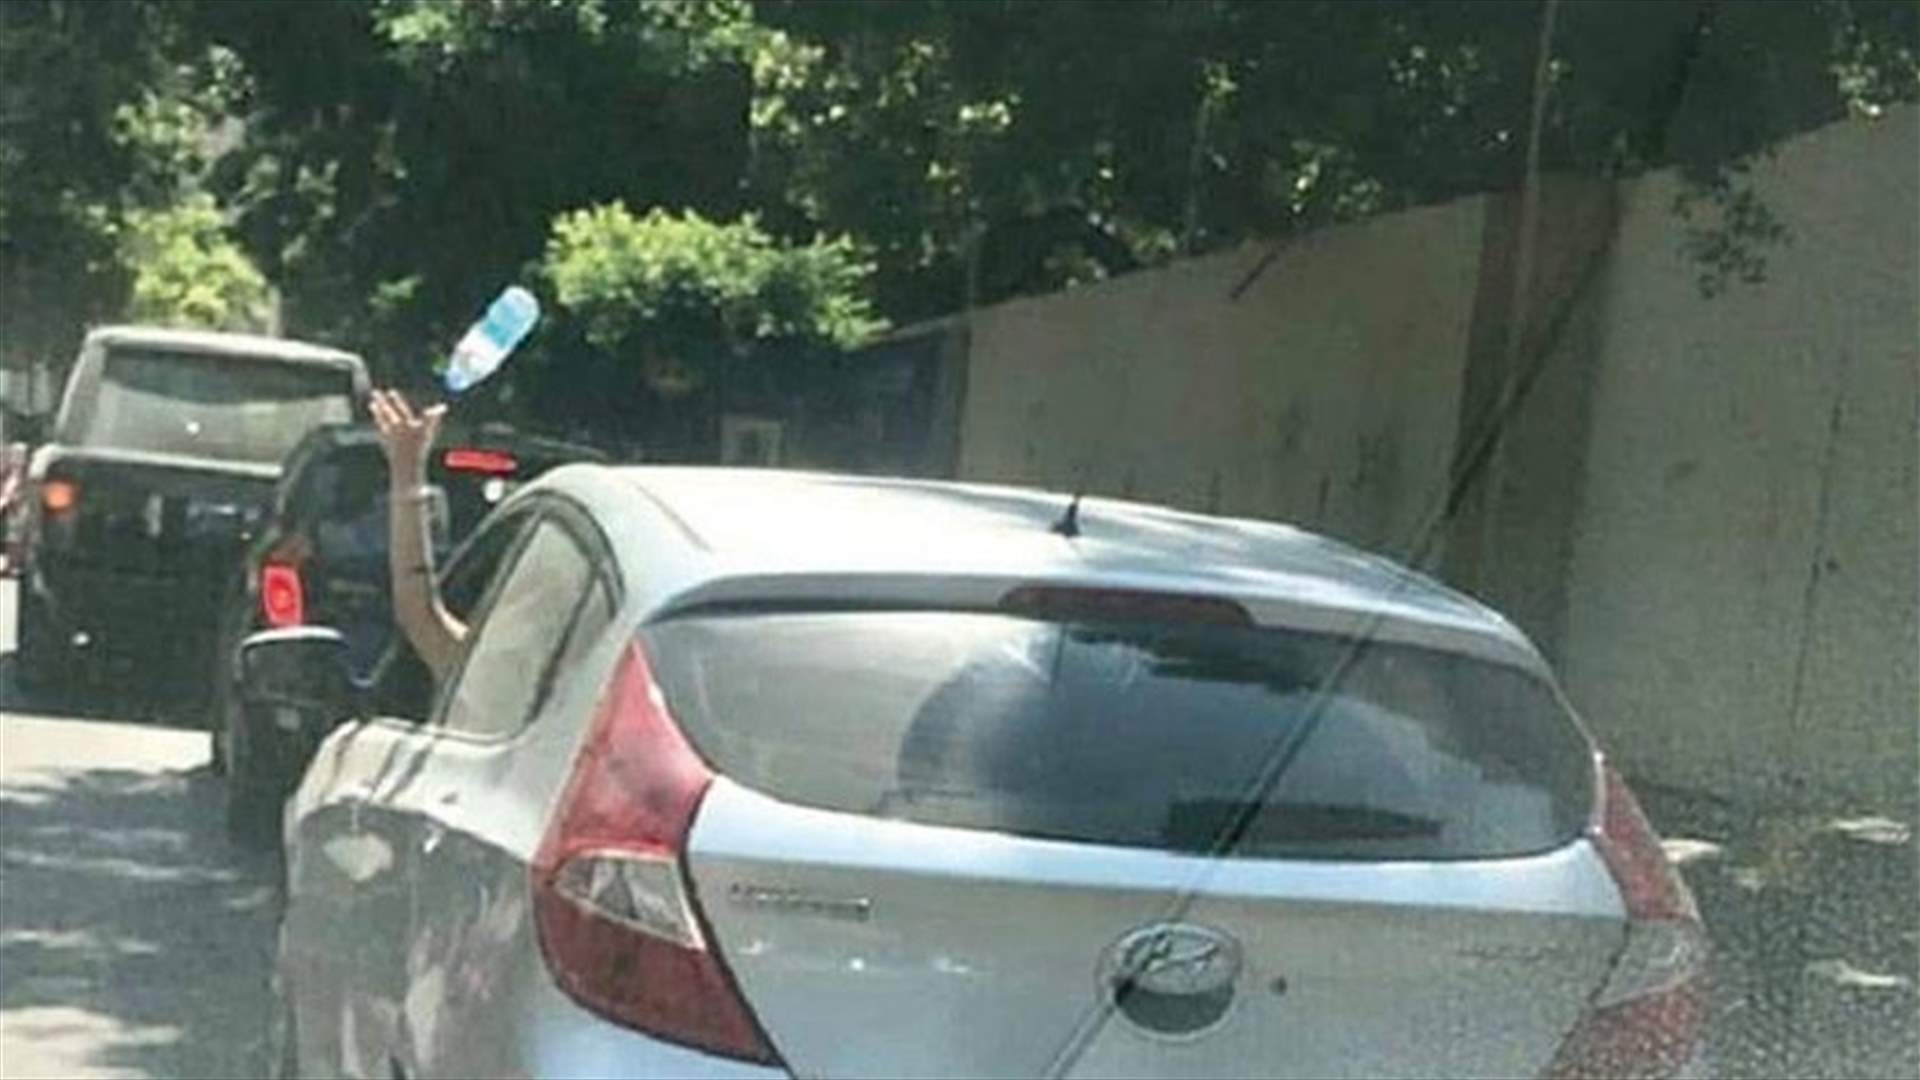 Environment Minister files lawsuit against woman who threw plastic bottle from her car window